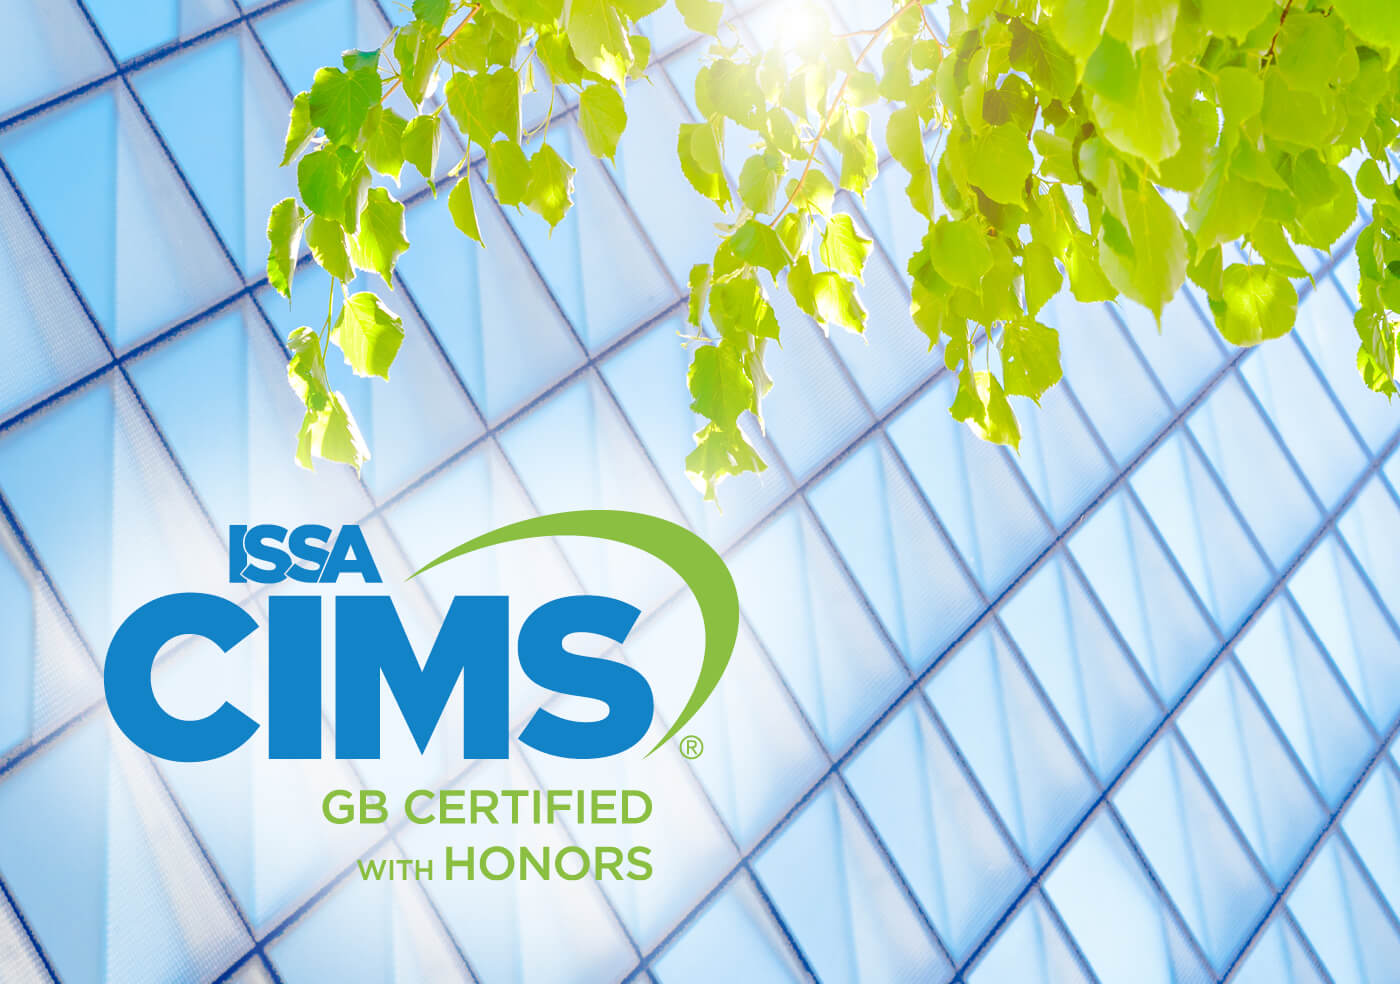 Kimco has earned the ISSA CIMS-GB Certified with Honors (logo)